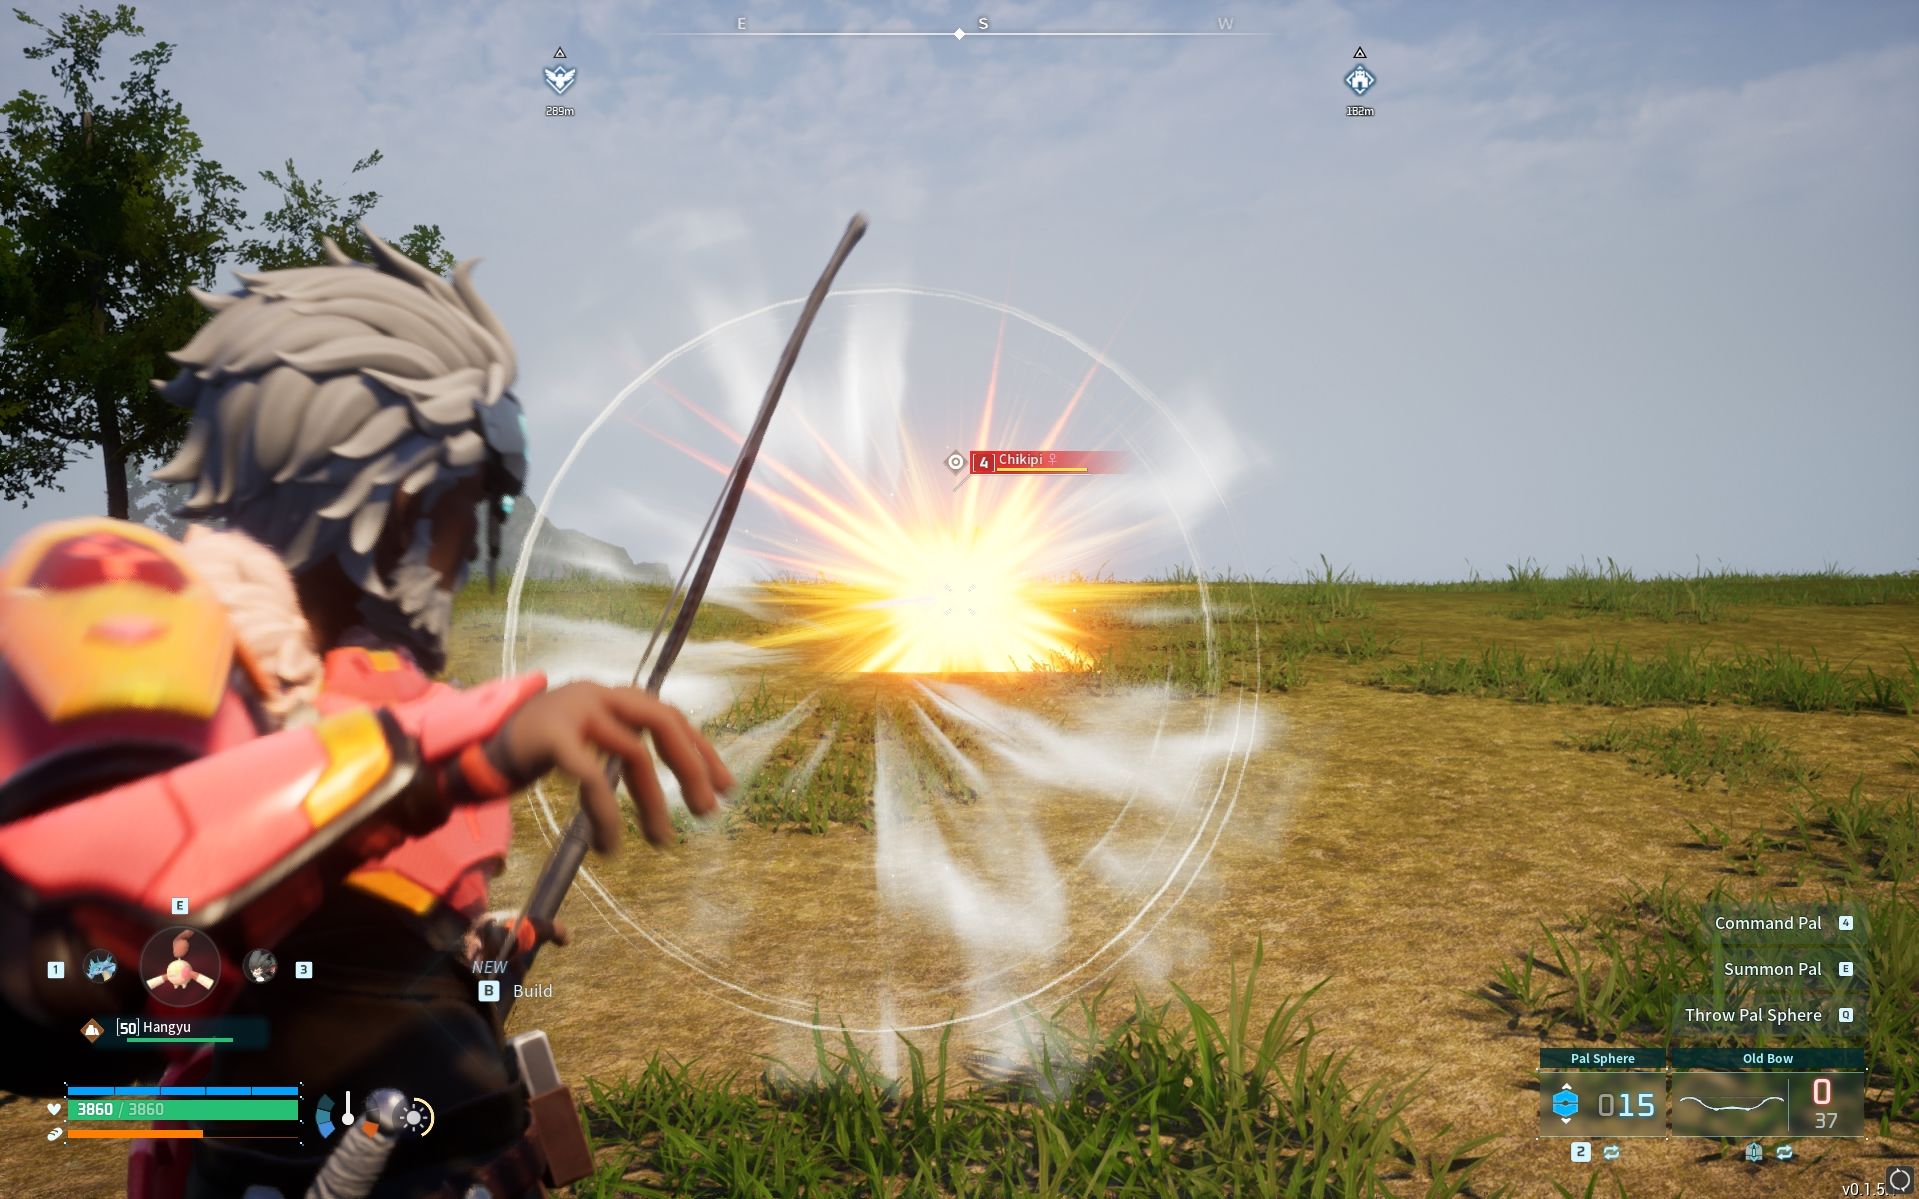 A player shooting Chikipi with the Legendary Old Bow in Palworld